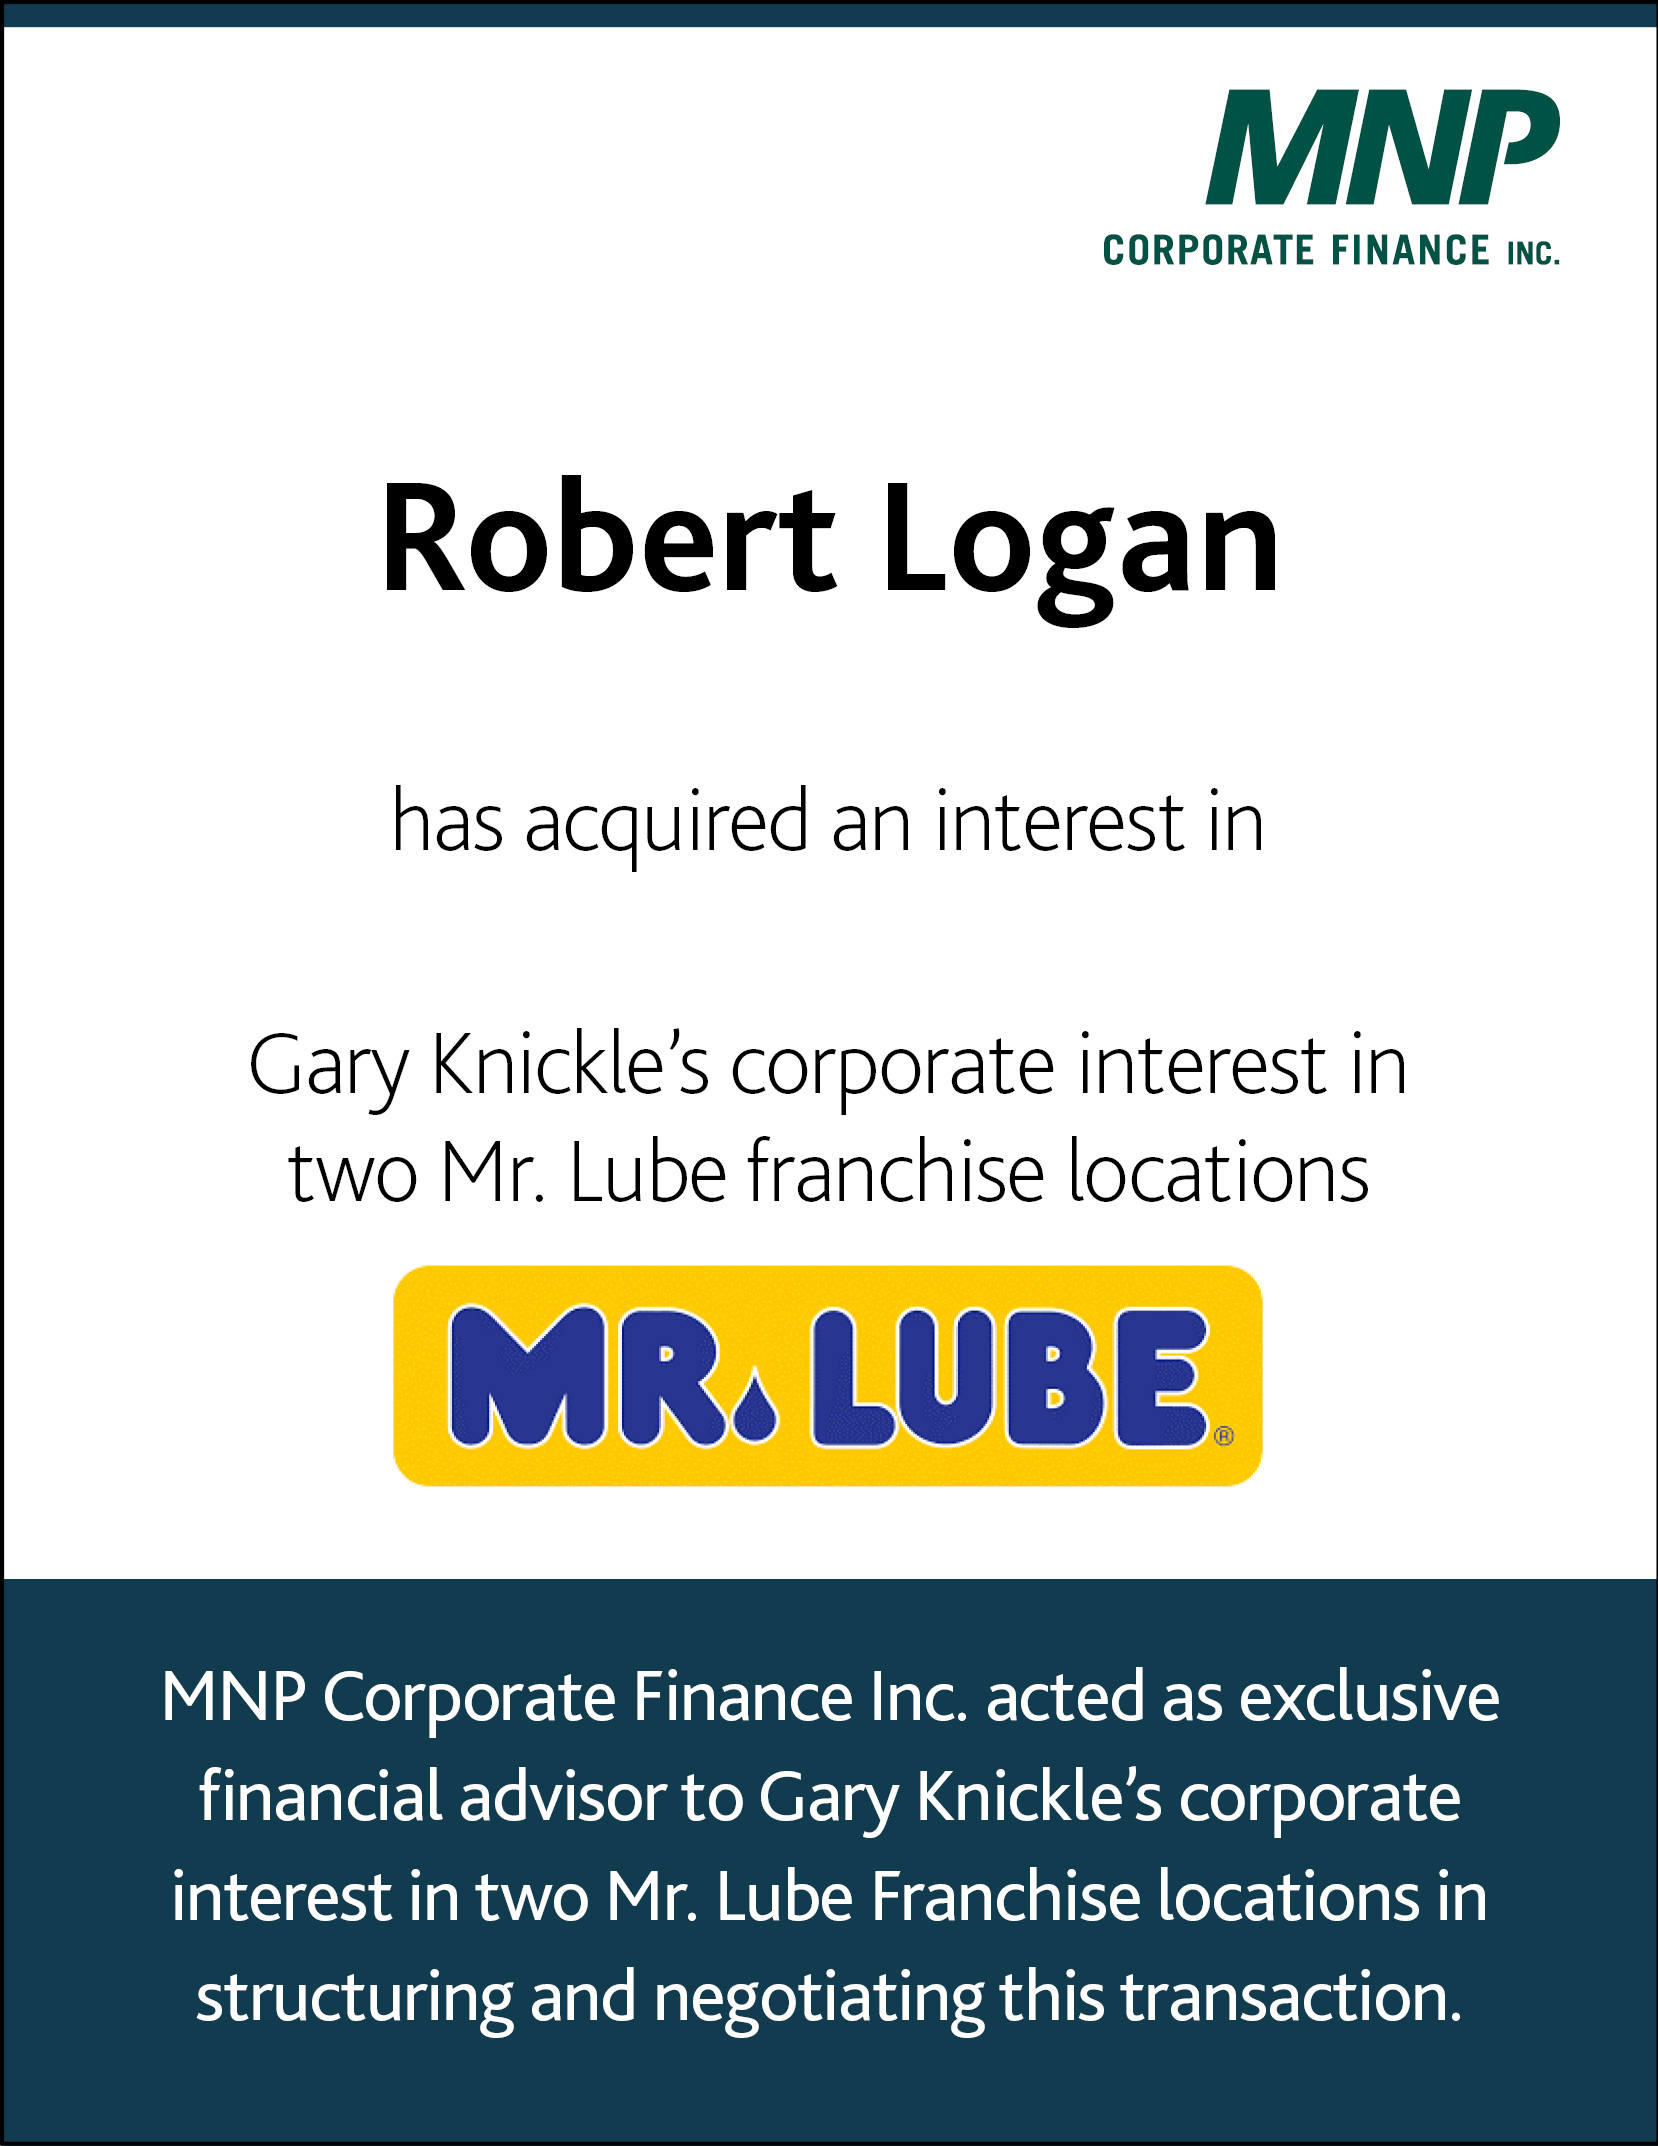 Robert Logan has acquired an interest in Gary Knickle's corporate interest in two Mr. Lube franchise locations